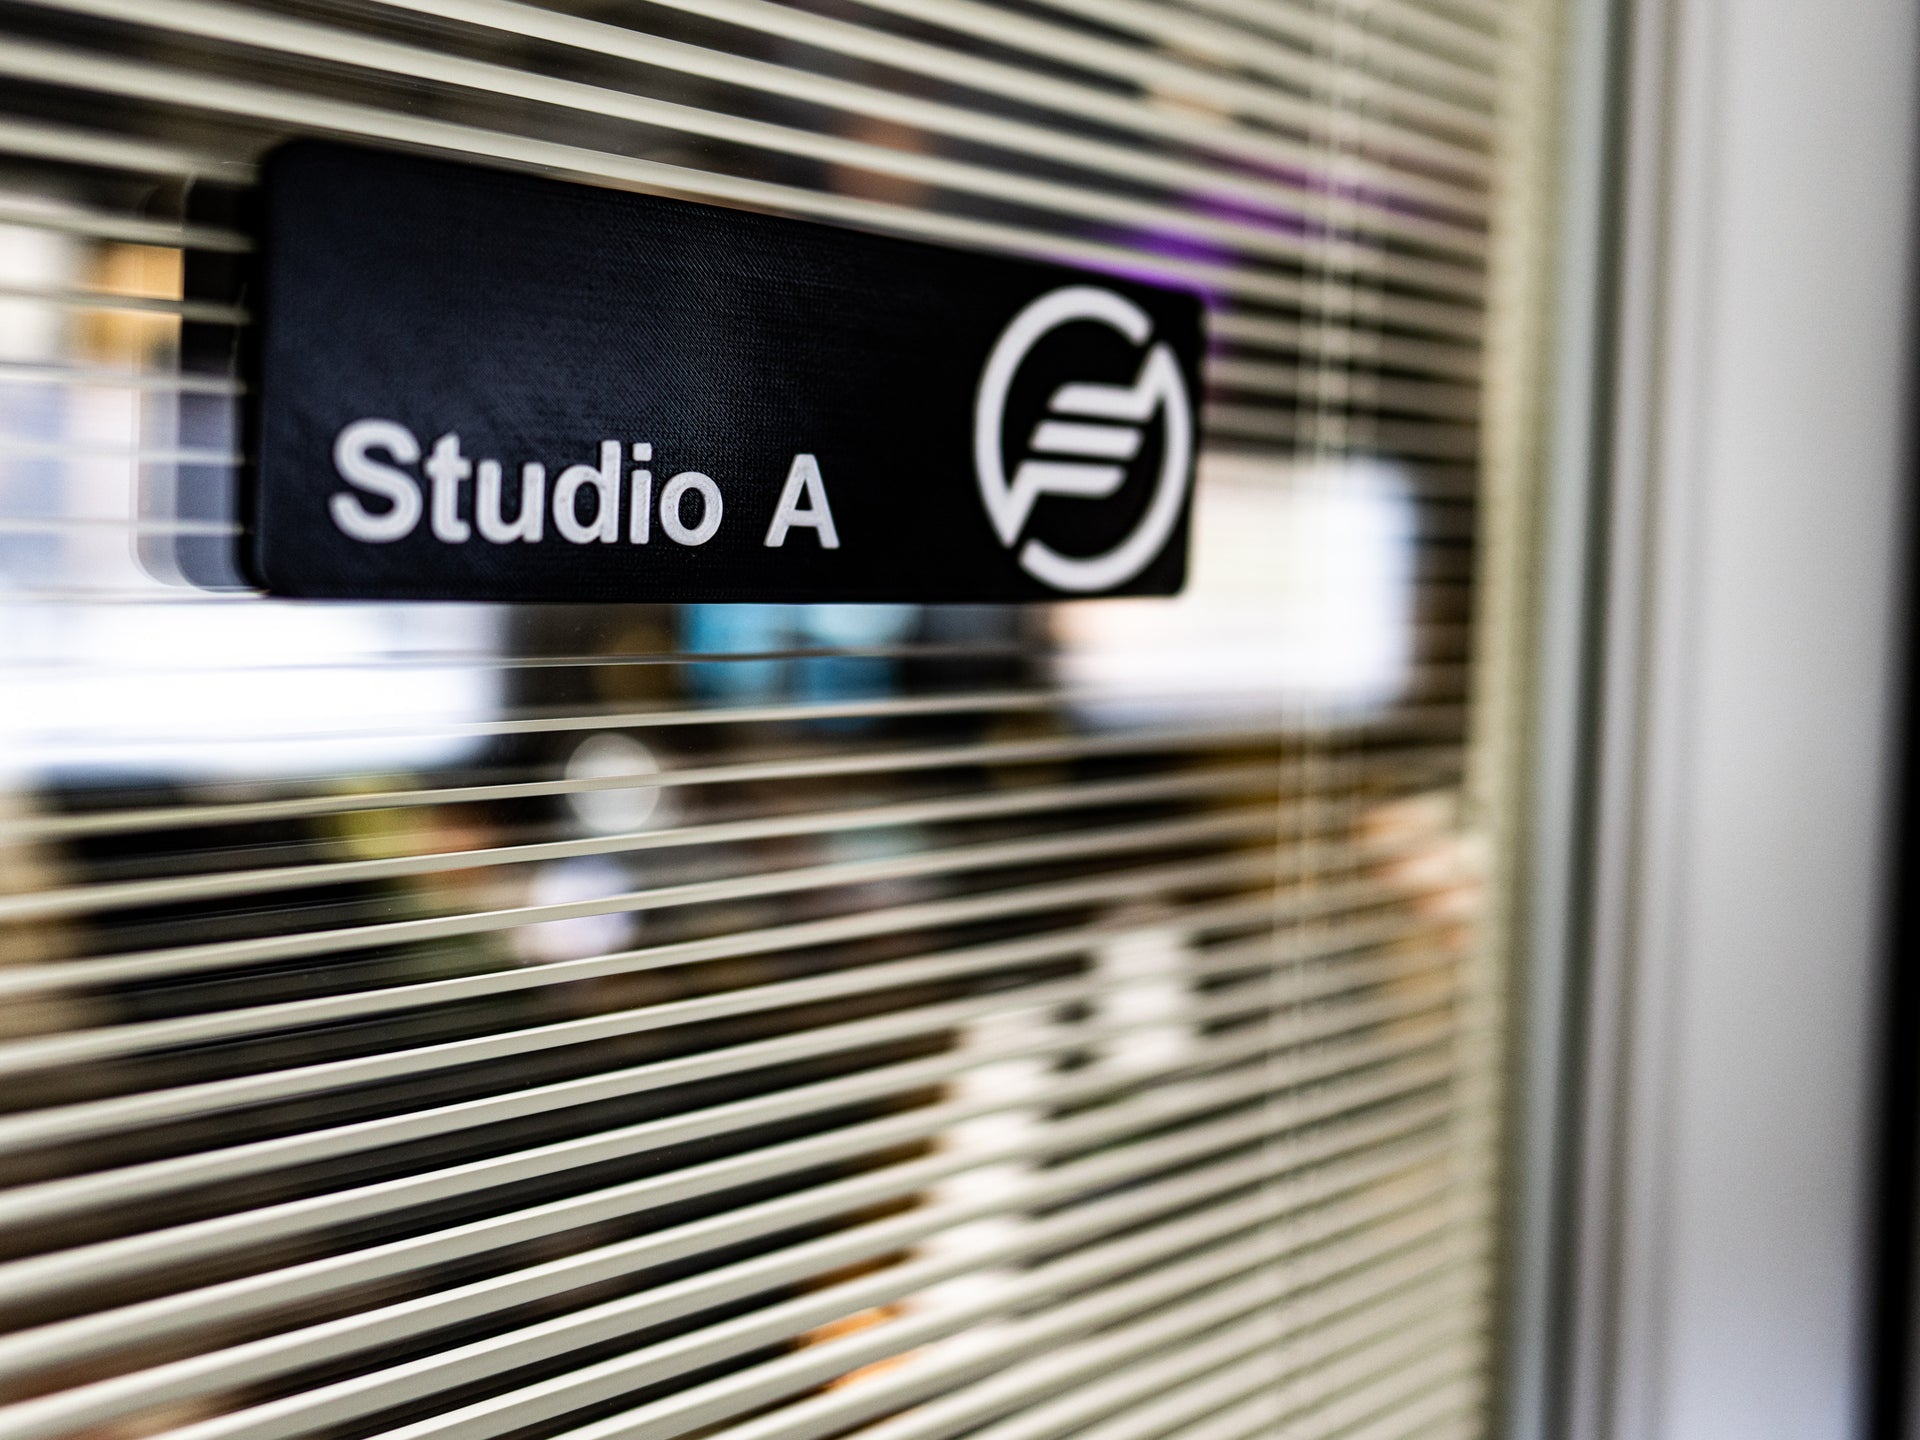 Load video: The Music Studio Sign